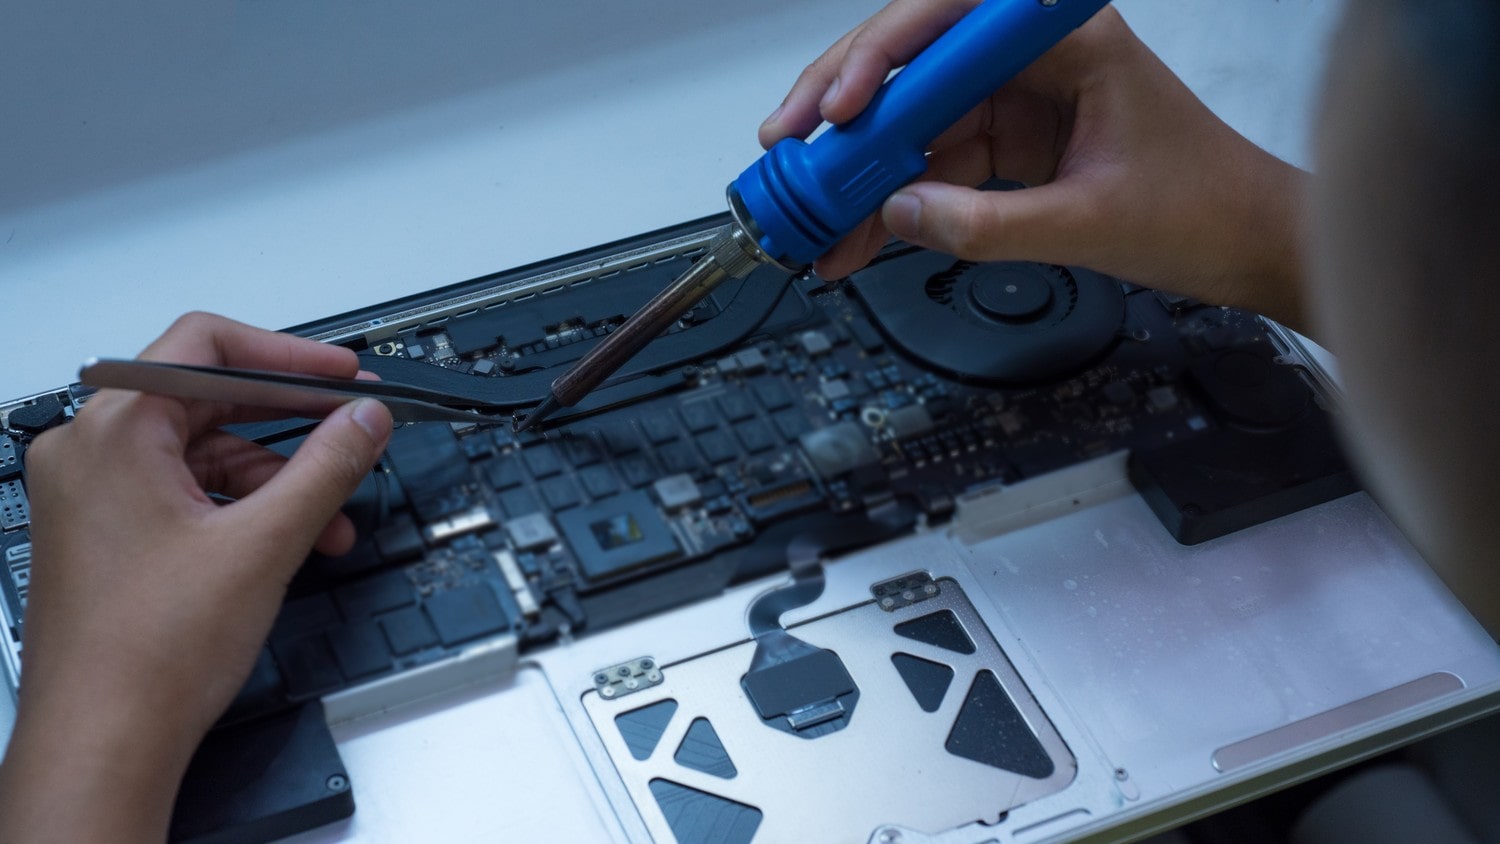 A close-up of a person repairing a laptop.